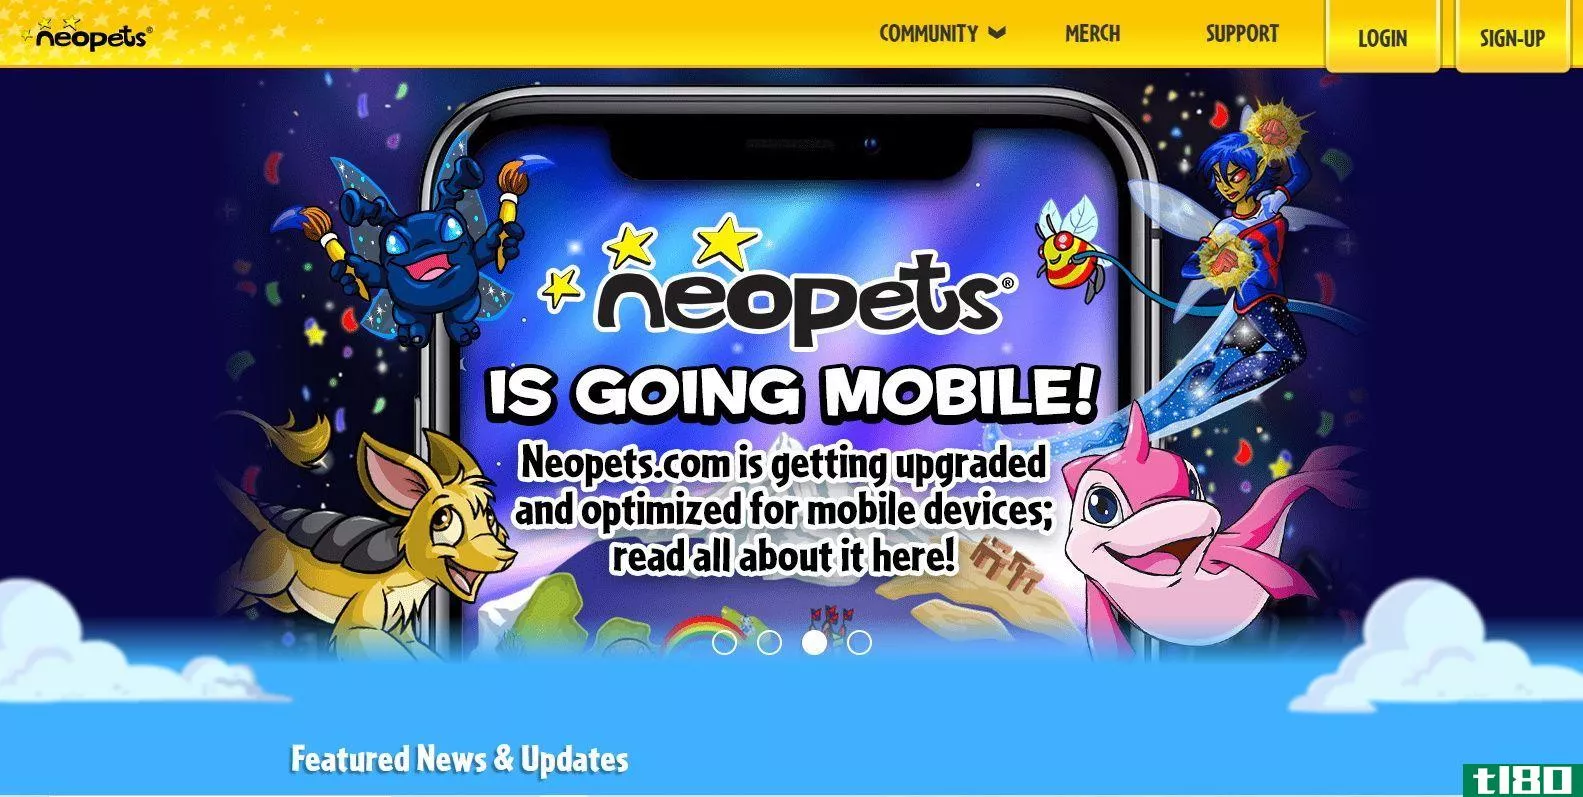 The homepage of Neopets' renovated desktop site, displaying a news update on the mobile version